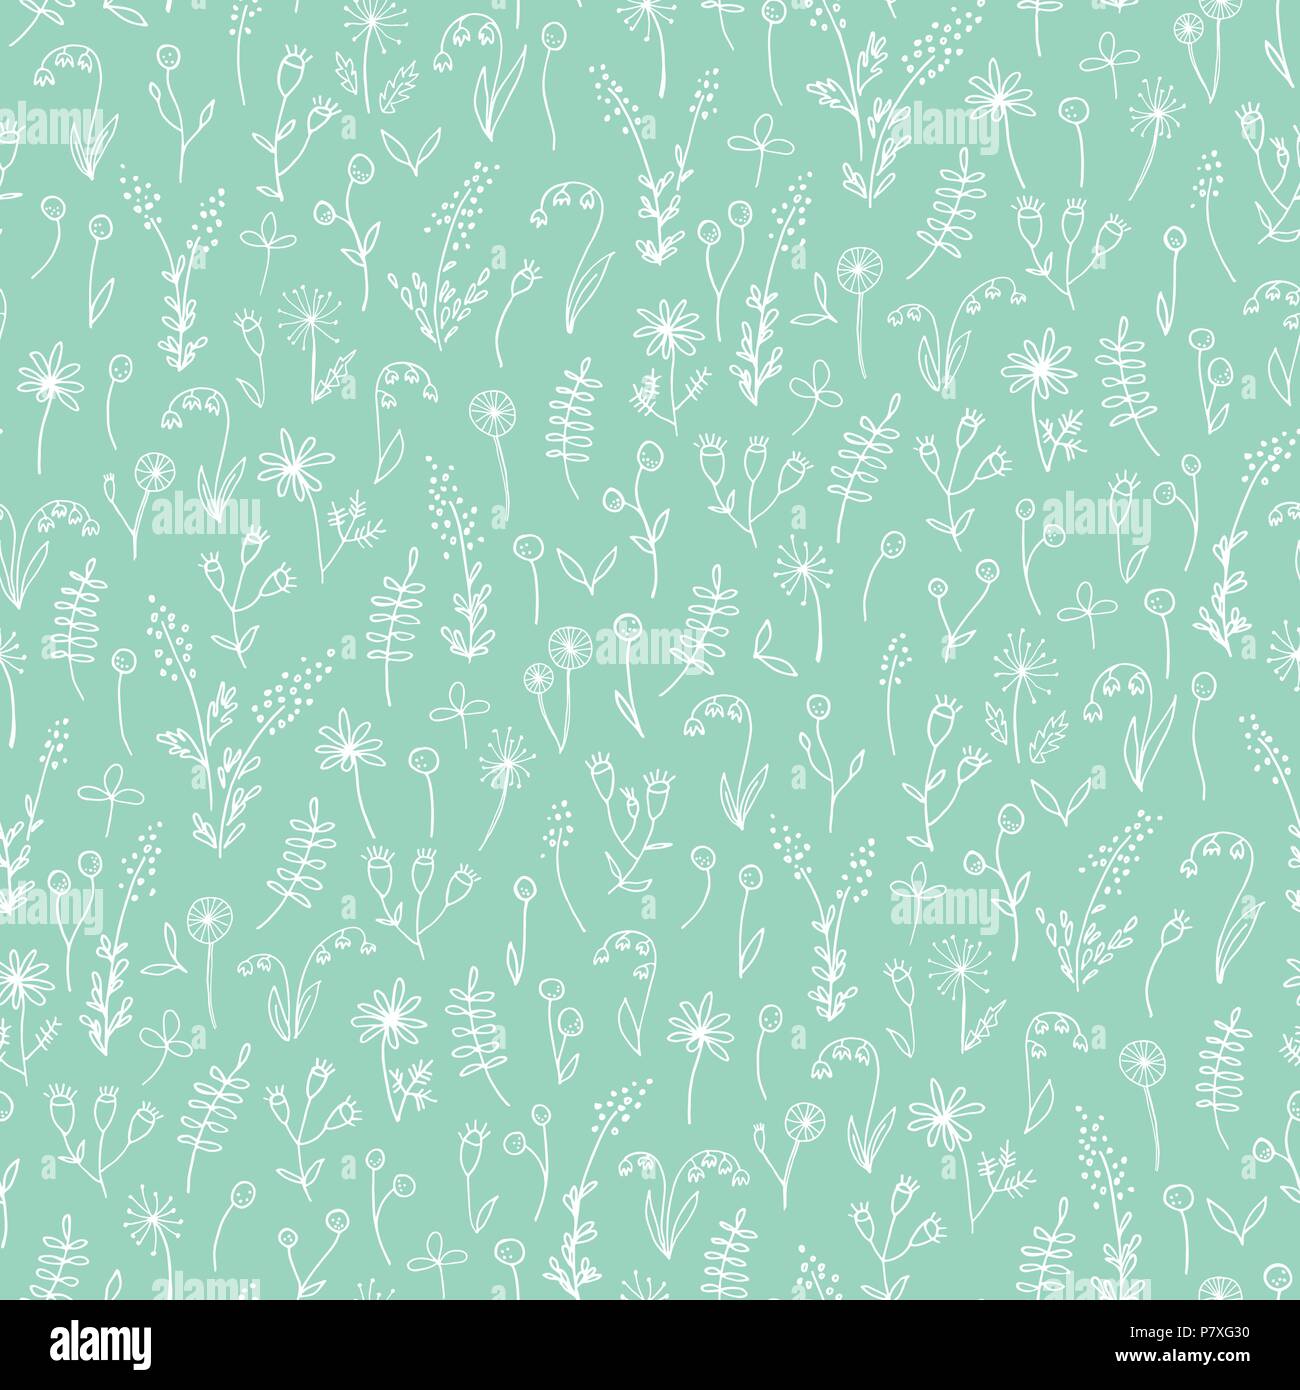 White Hand Drawn Doodle Floral on Mint Background Vector Seamless Pattern. Cute Meadow Flowers and Leaves Silhouettes. Line Drawing Allover Background Stock Vector